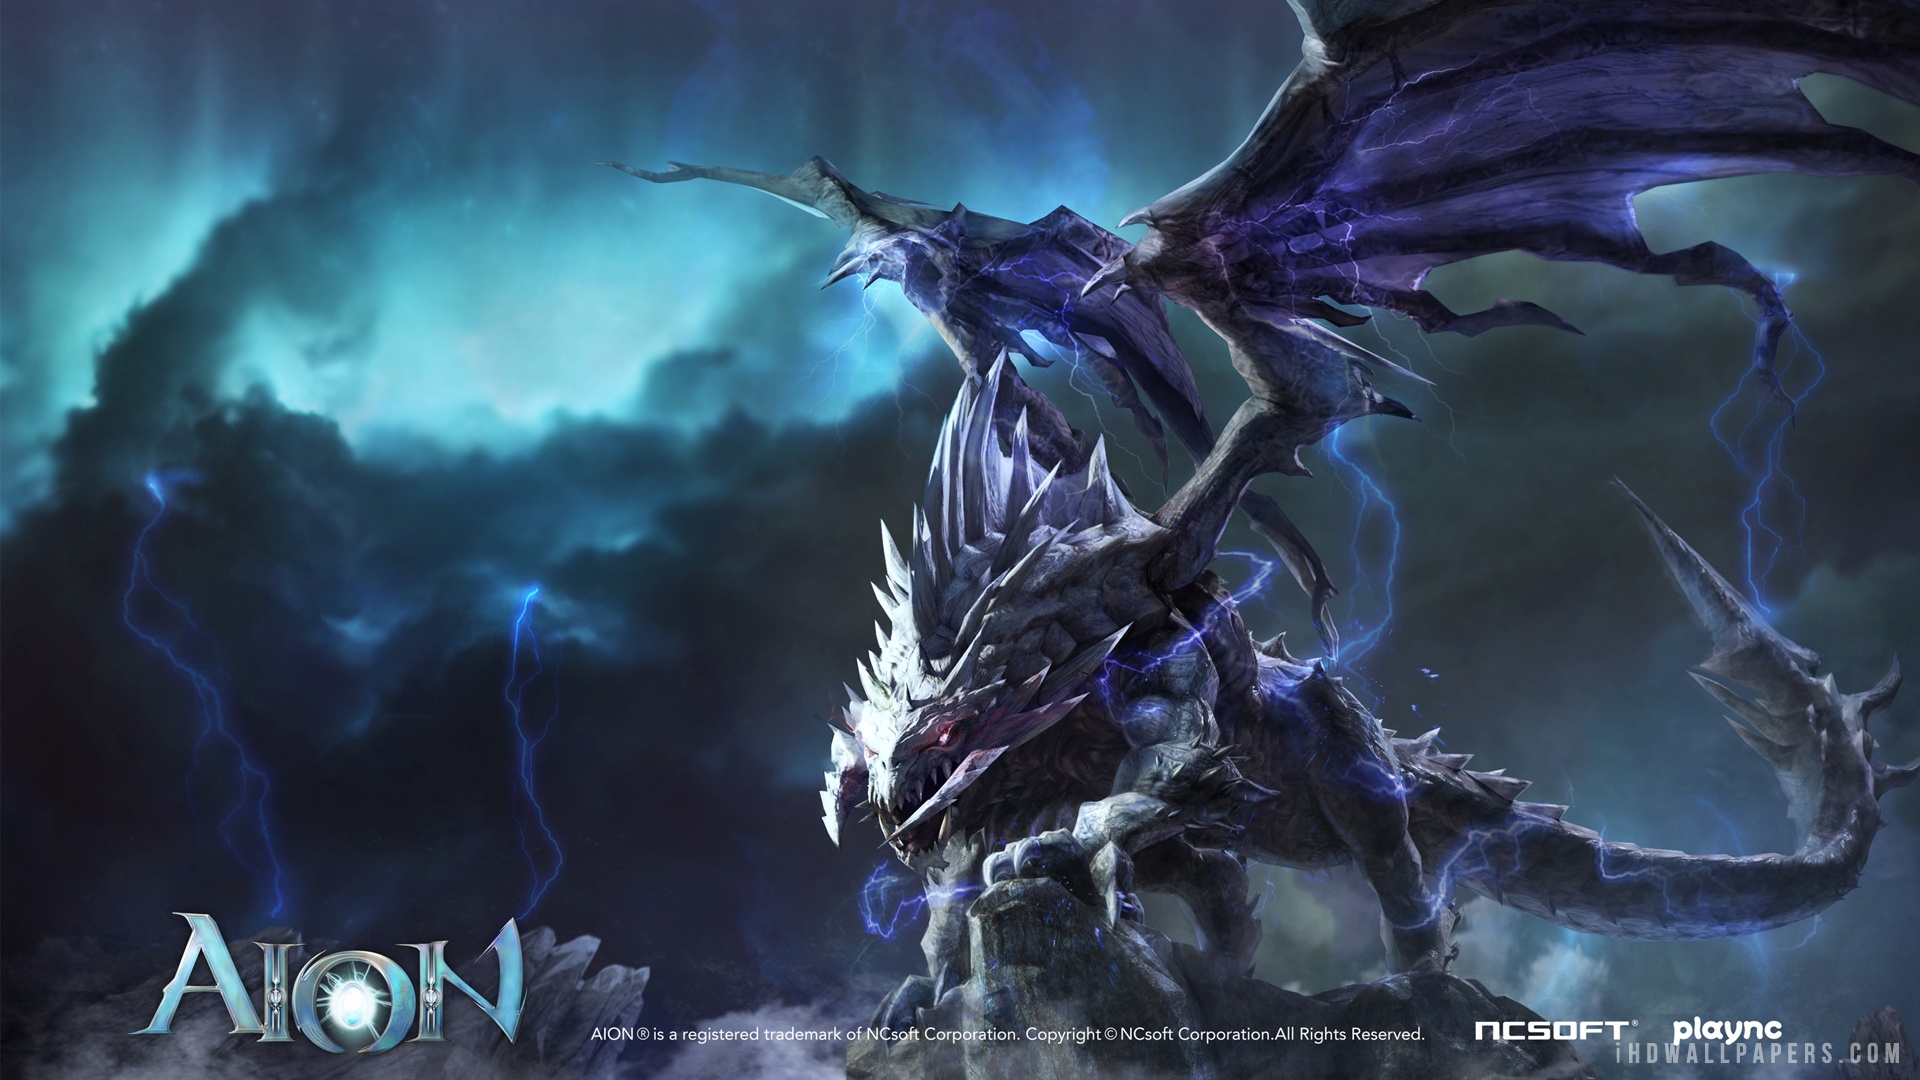 Aion: The Tower of Eternity - gra fantasy MMORPG